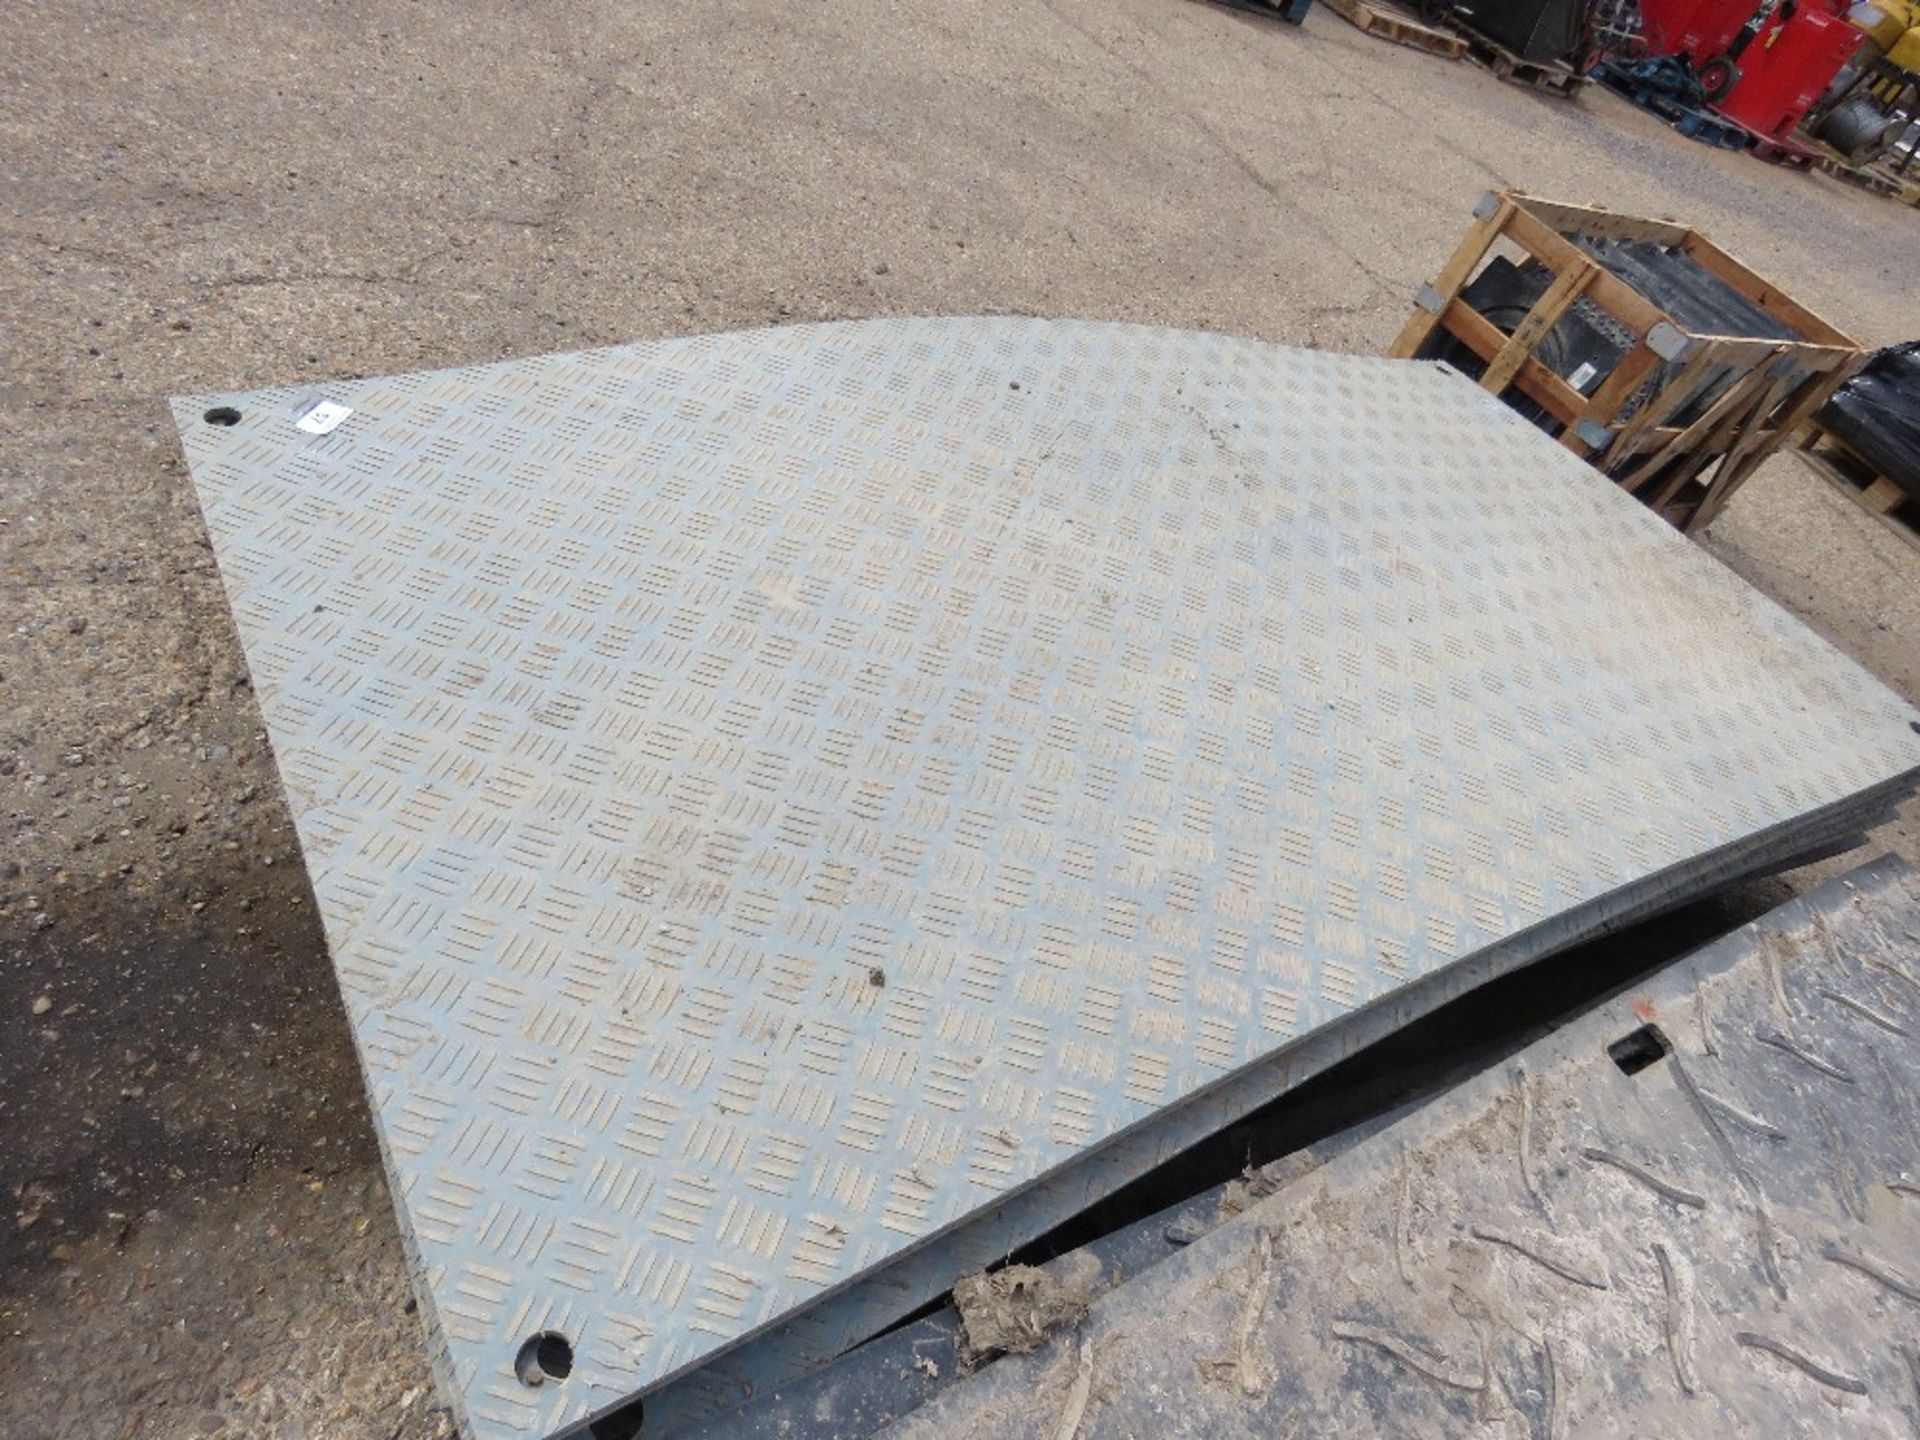 STACK OF GREY TRACK MATS, 10MM THICKNESS: 21NO APPROX @ 1.25M X 2.5M. DIRECT FROM LOCAL DEPOT CLOSU - Image 6 of 6